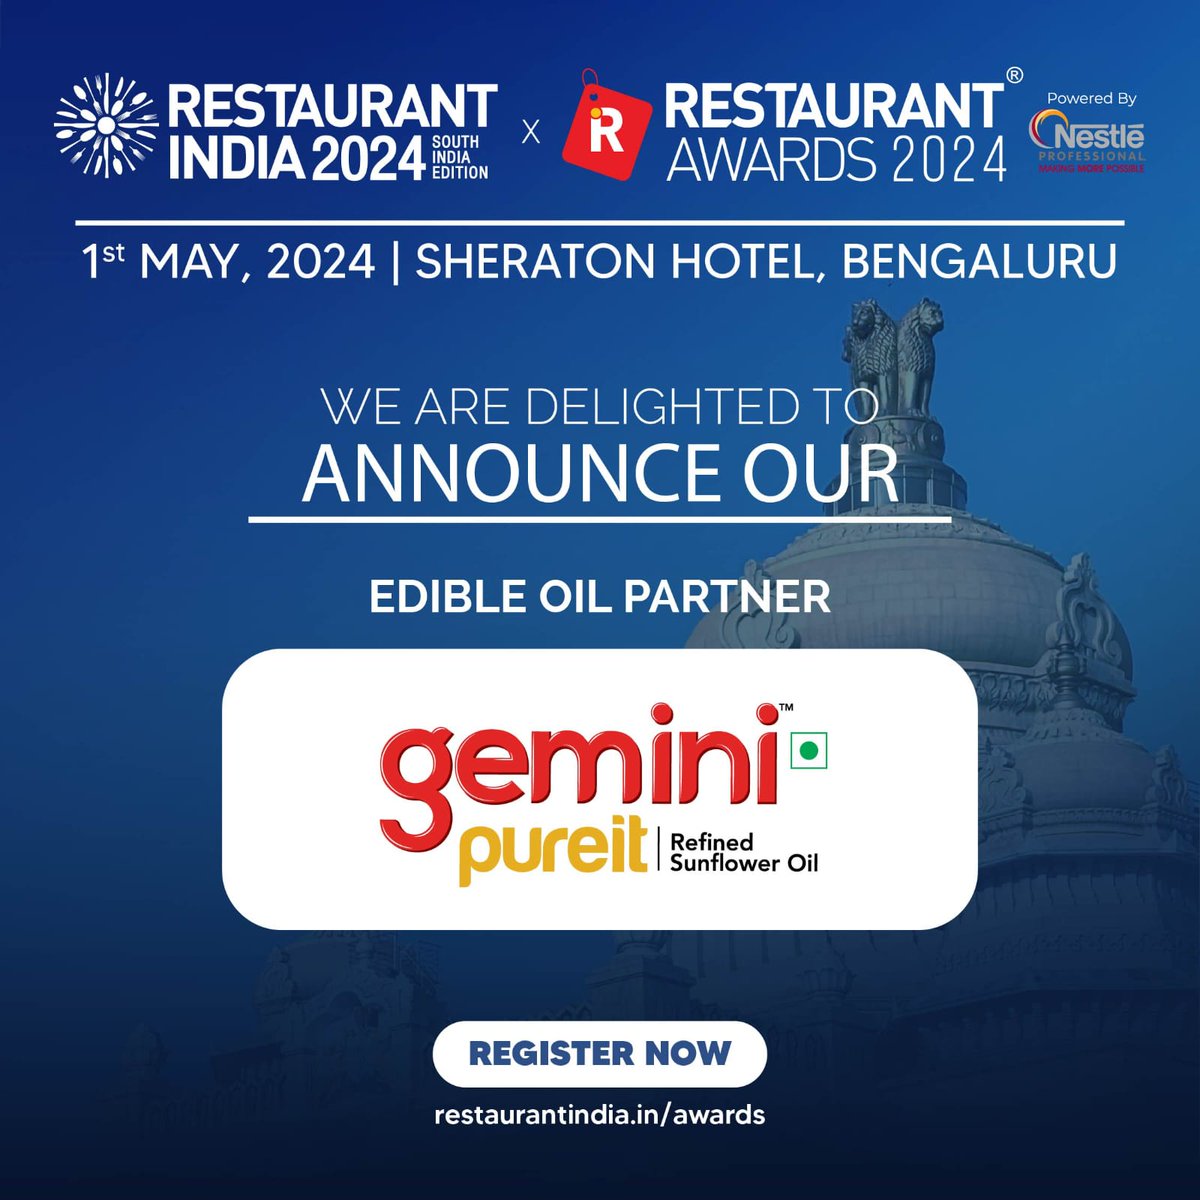 We are delighted to announce Gemini Pureit as our Edible Oil Partner at Restaurant India 2024 South India Edition x Restaurant Awards 2024

1st May 2024, Hotel Sheraton Grand, Brigade Gateway, Bengaluru

Register Now: rb.gy/k3q5yf

#RA2024 #GeminiPureit #SunflowerOil